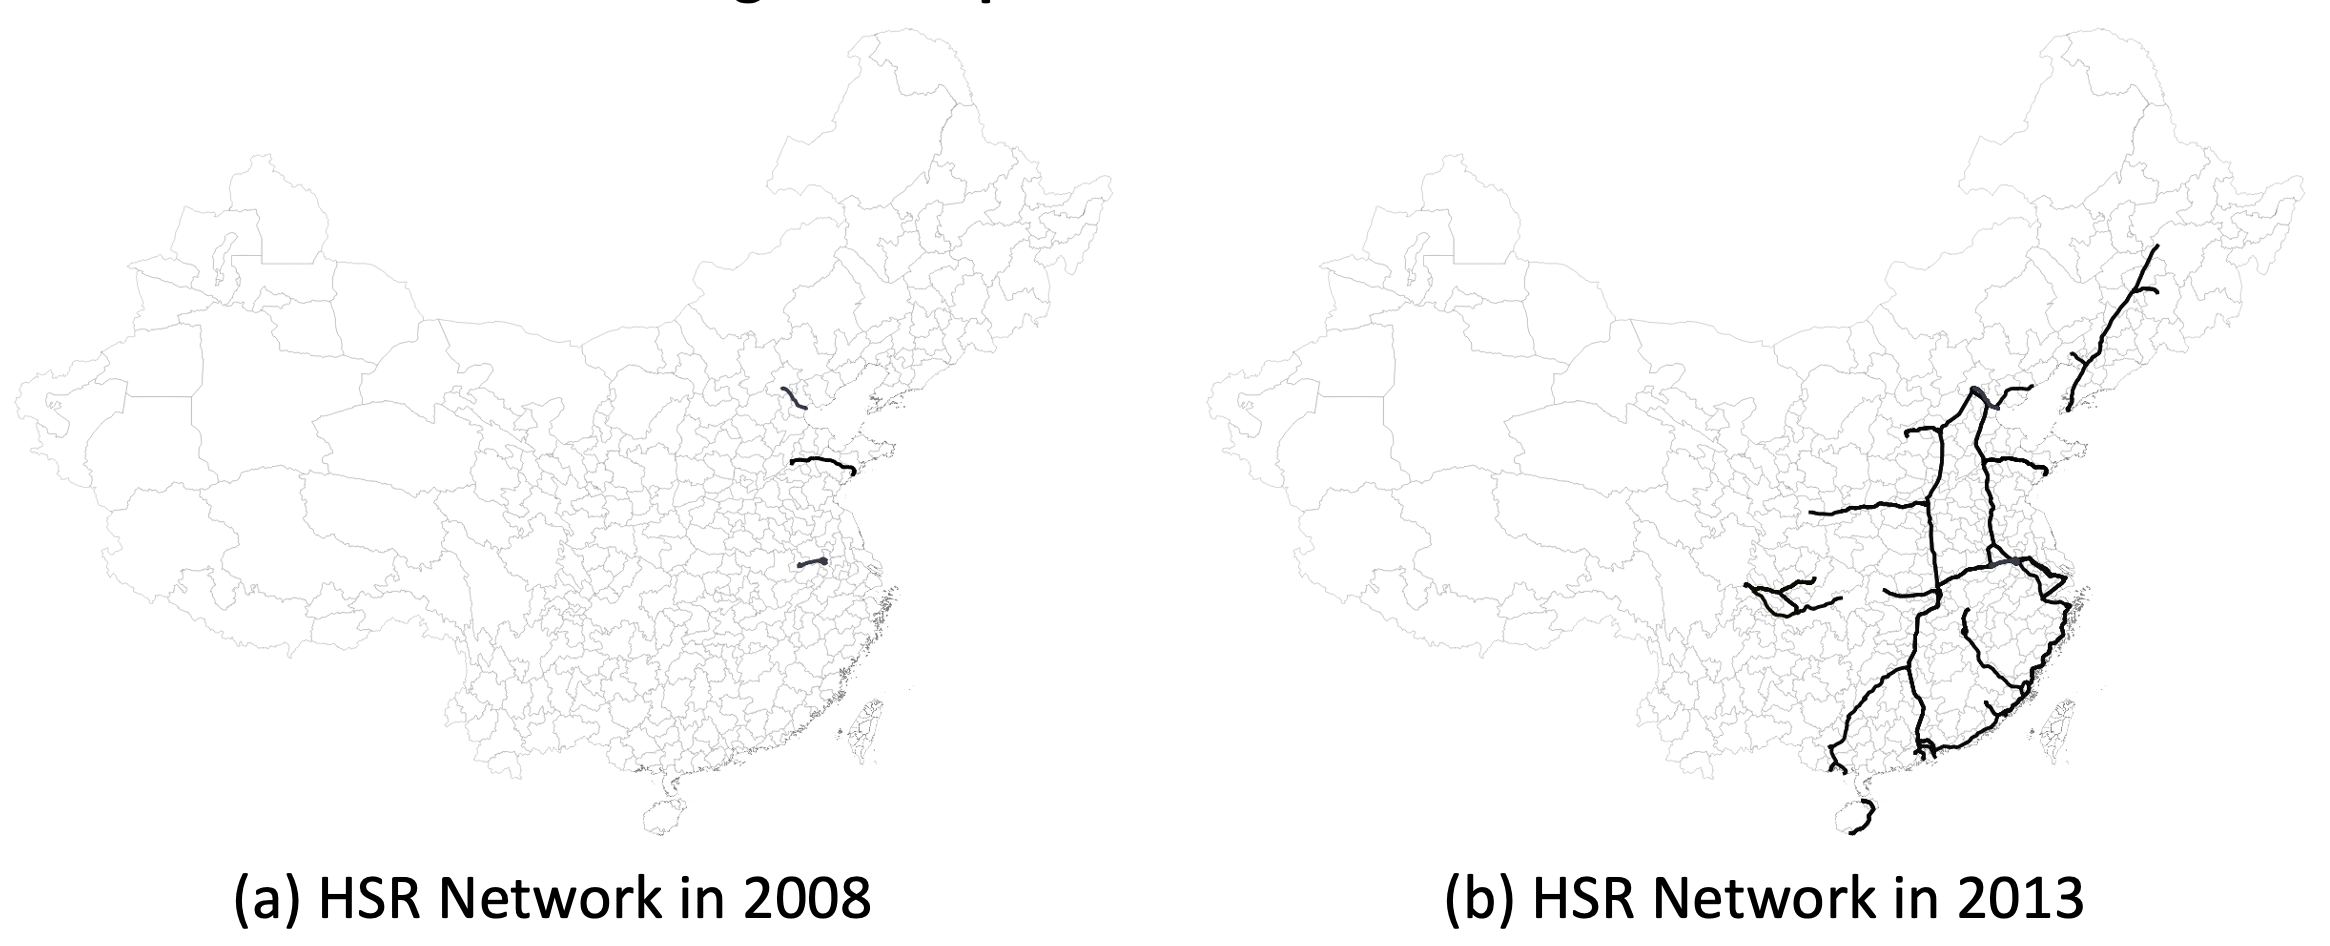 Figure 1 Expansion of China’s HSR network